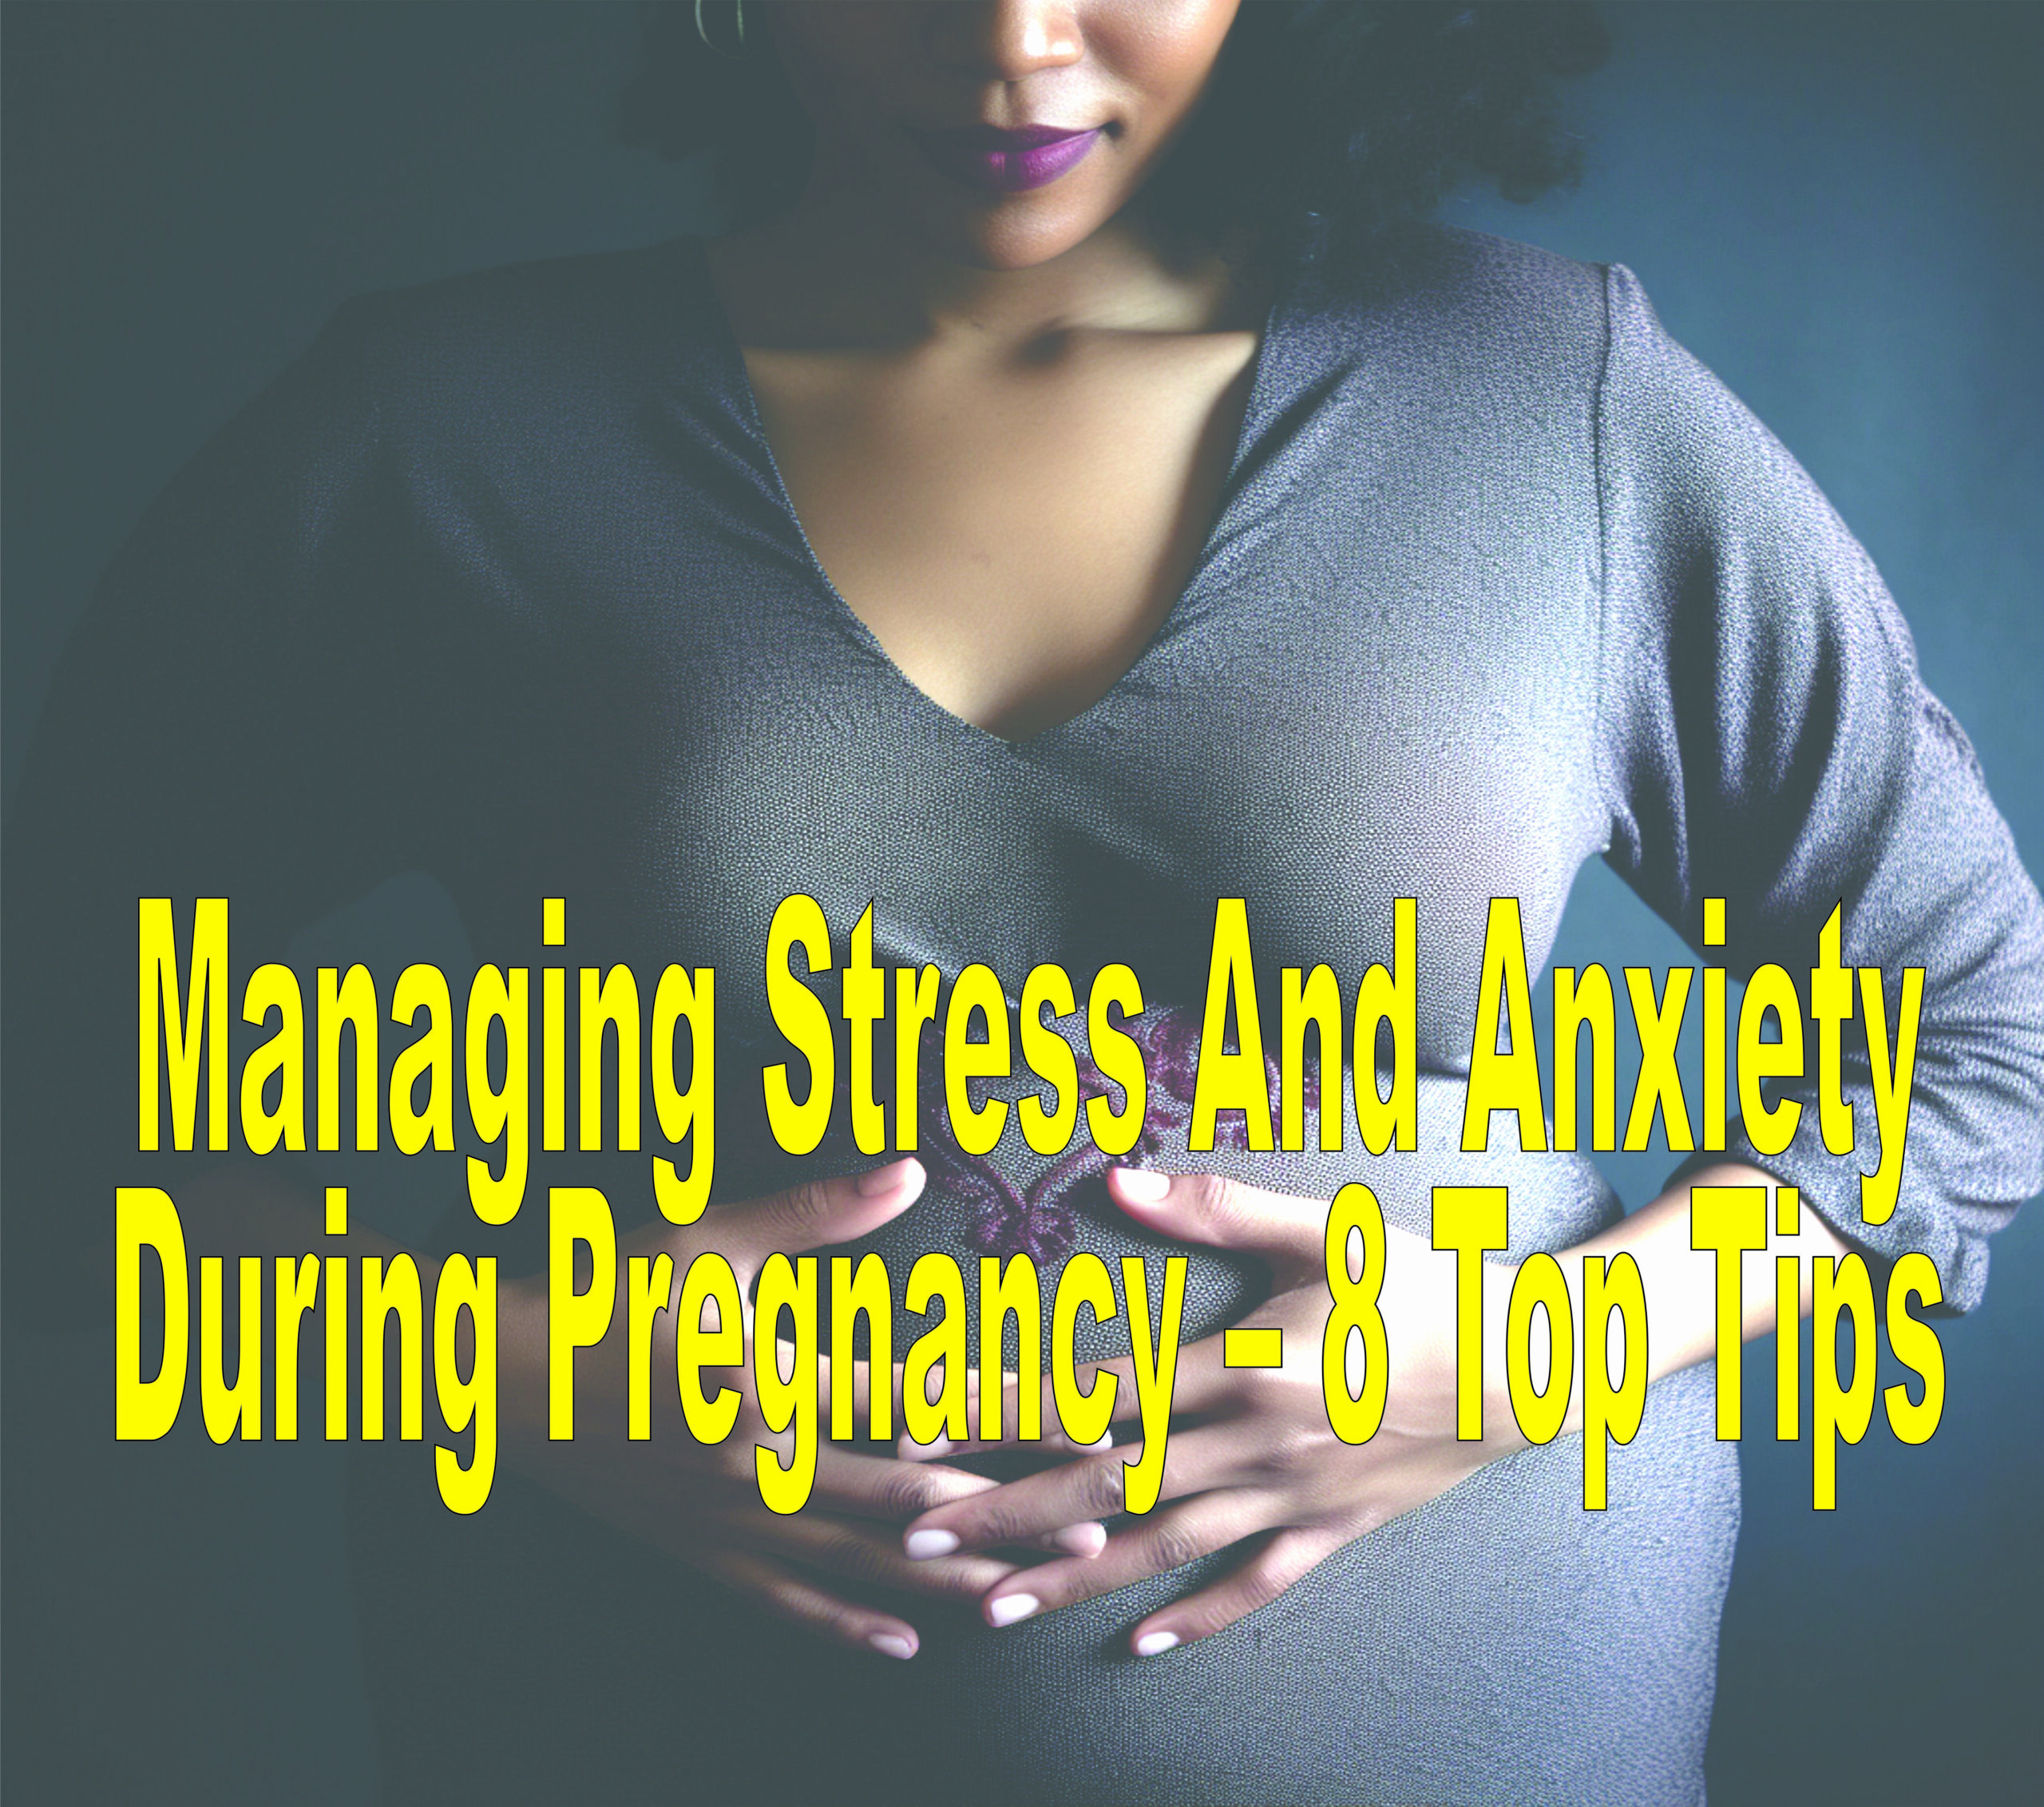 Managing Stress And Anxiety During Pregnancy – 8 Top Tips